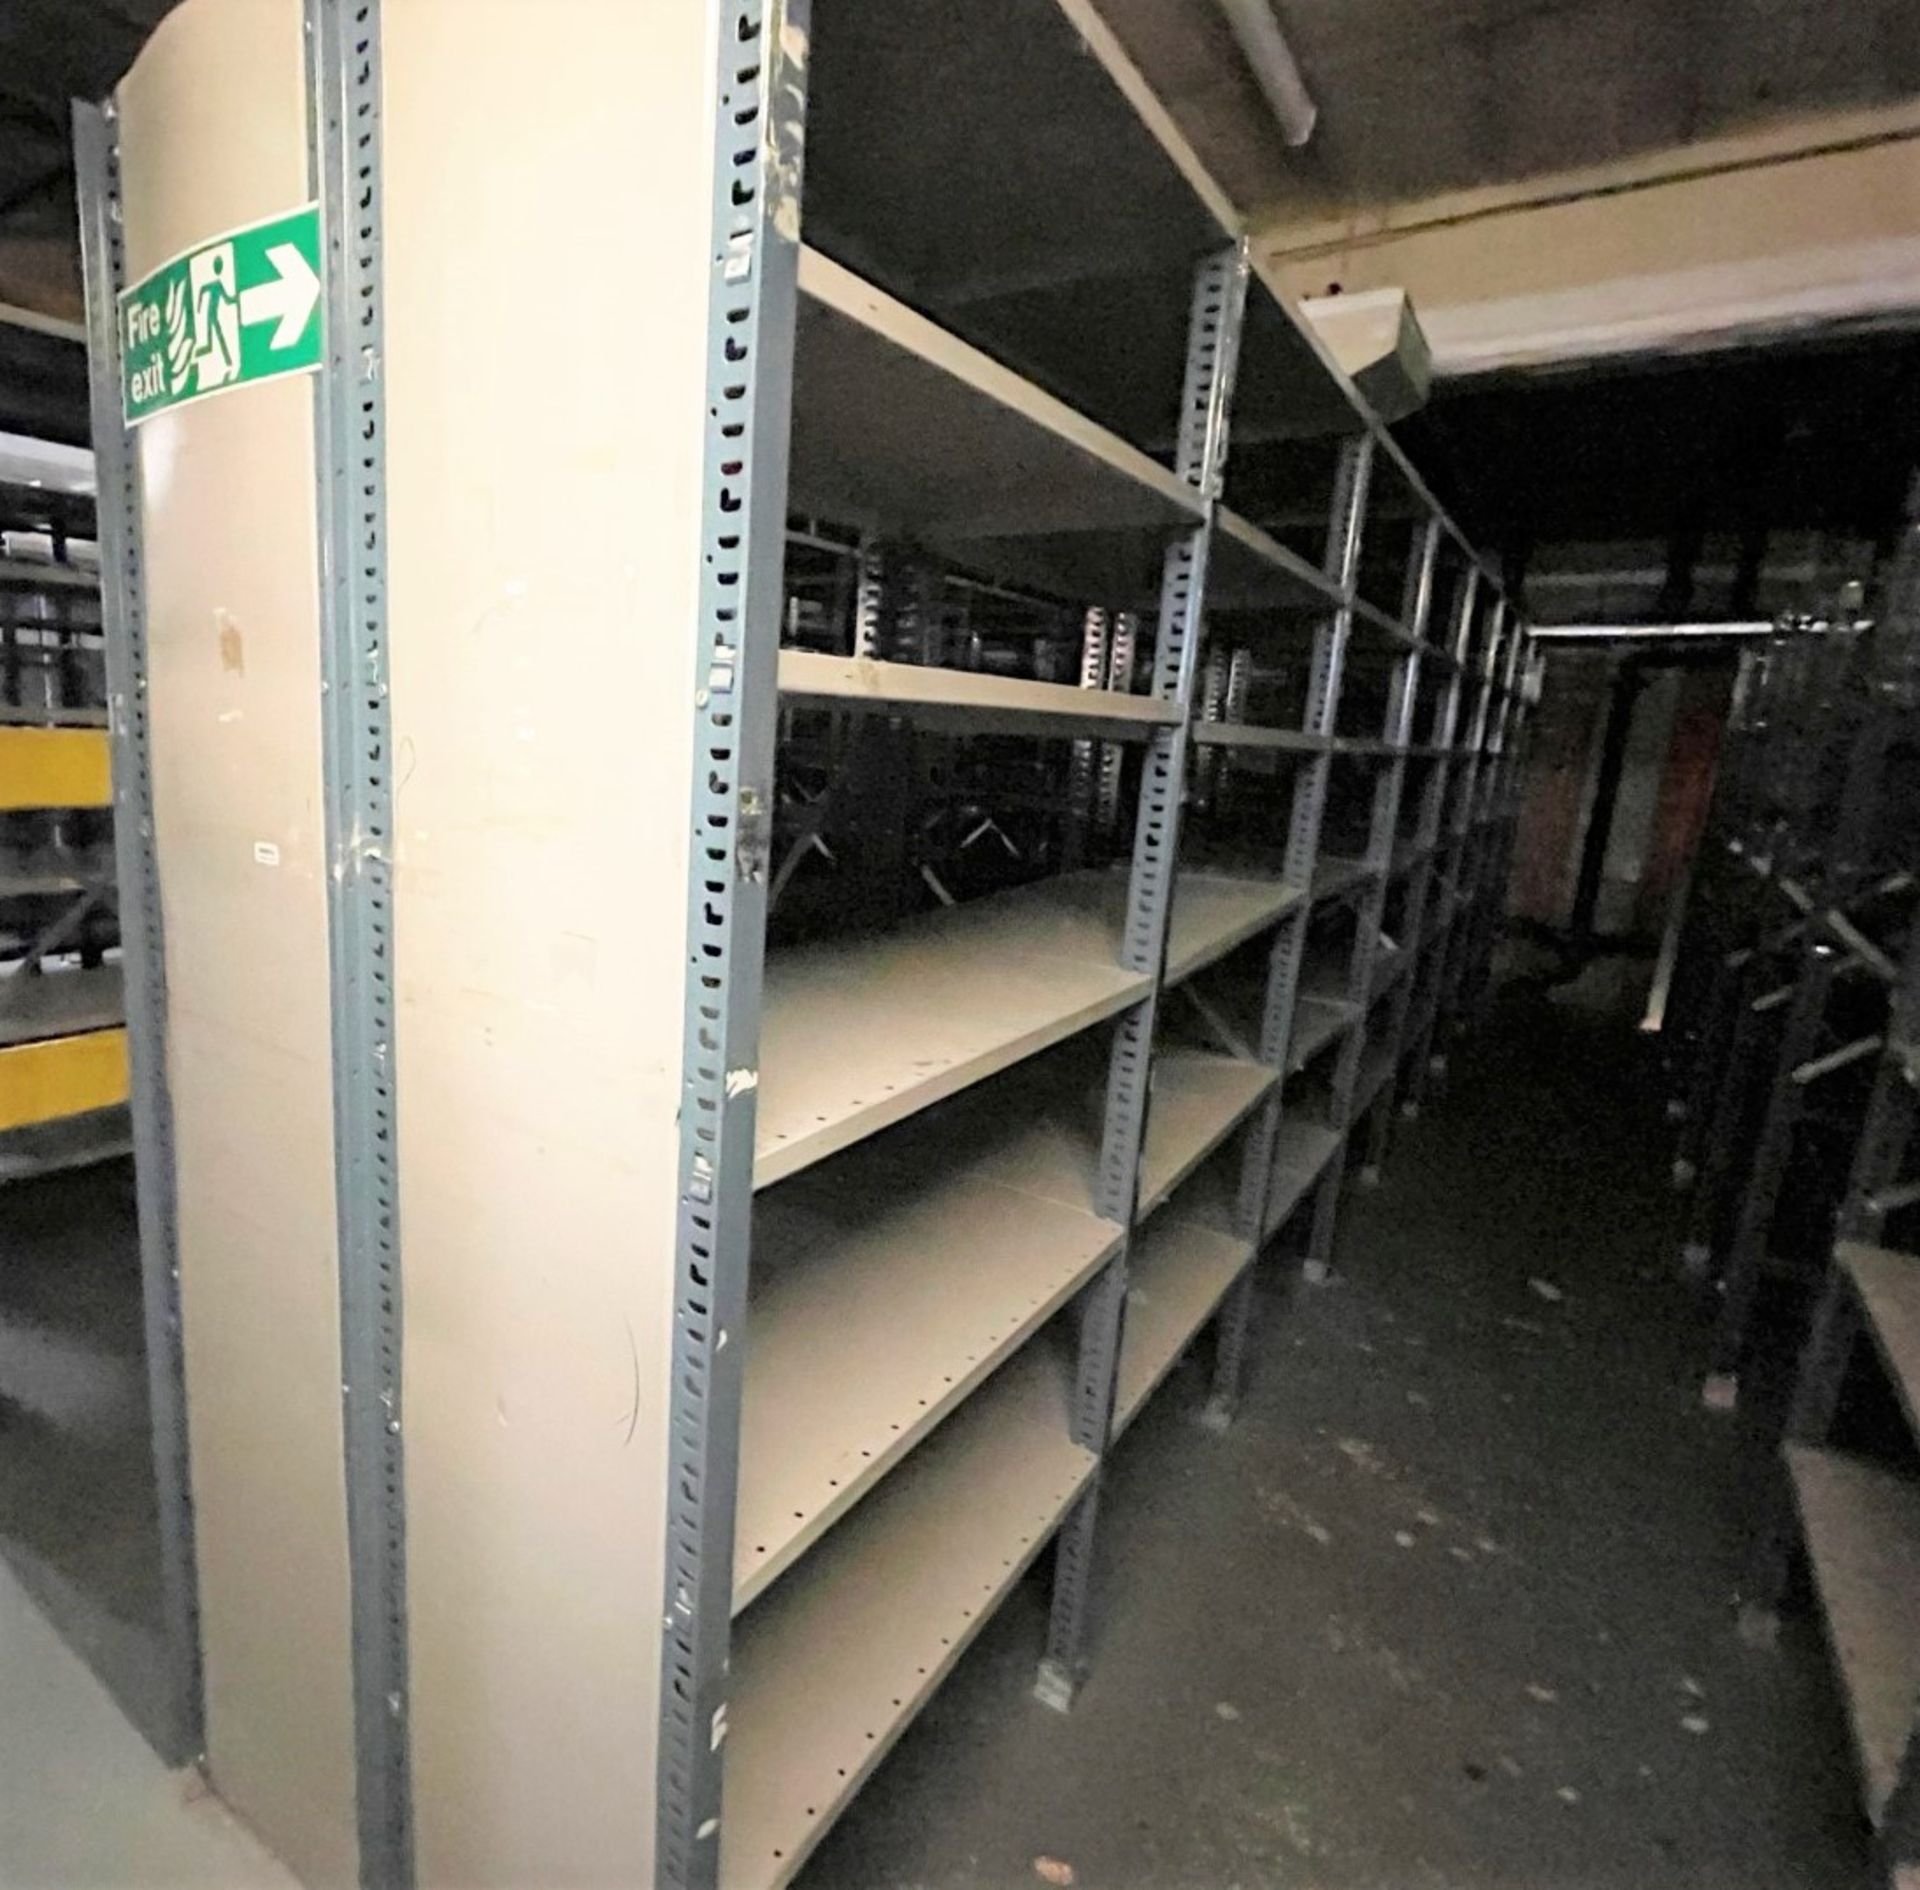 16 x Bays of Metal Warehouse Storage Shelving and Clothes Rails - Includes 8 x Shelving Bays and 8 x - Image 3 of 4